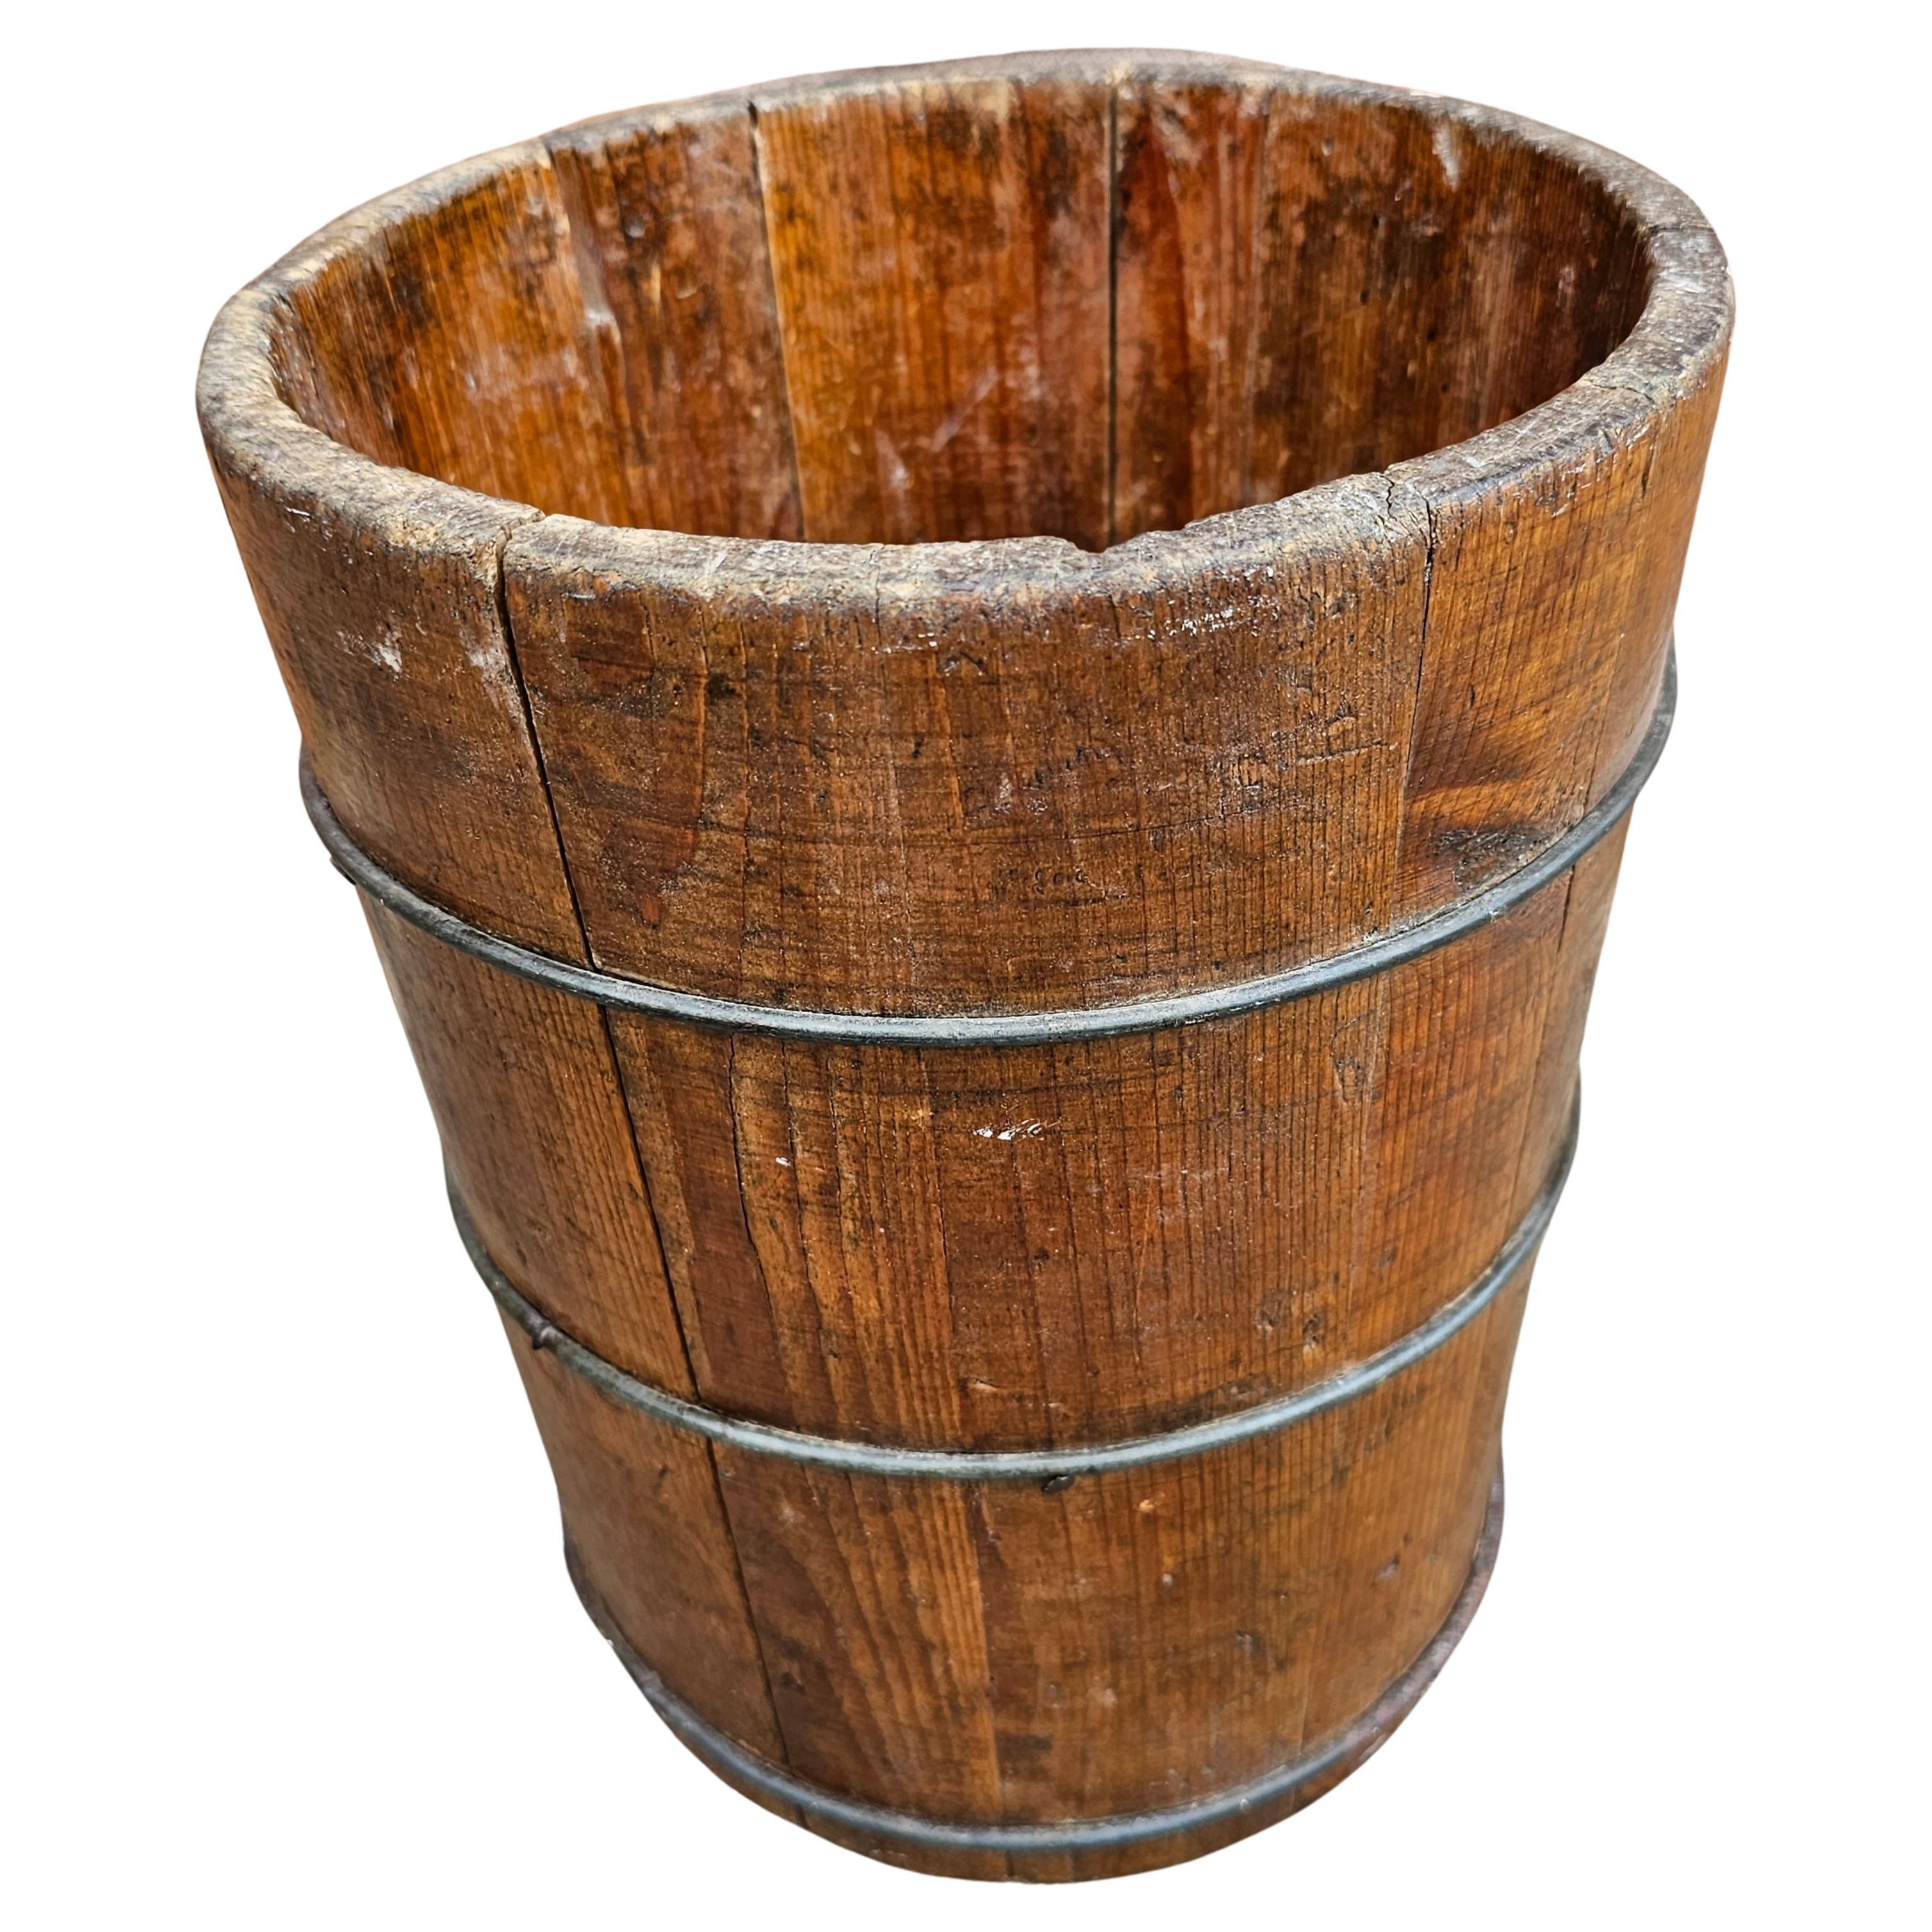 19th Century Handcrafted Turned Wooden Bail Bucket, Nowadays Planter